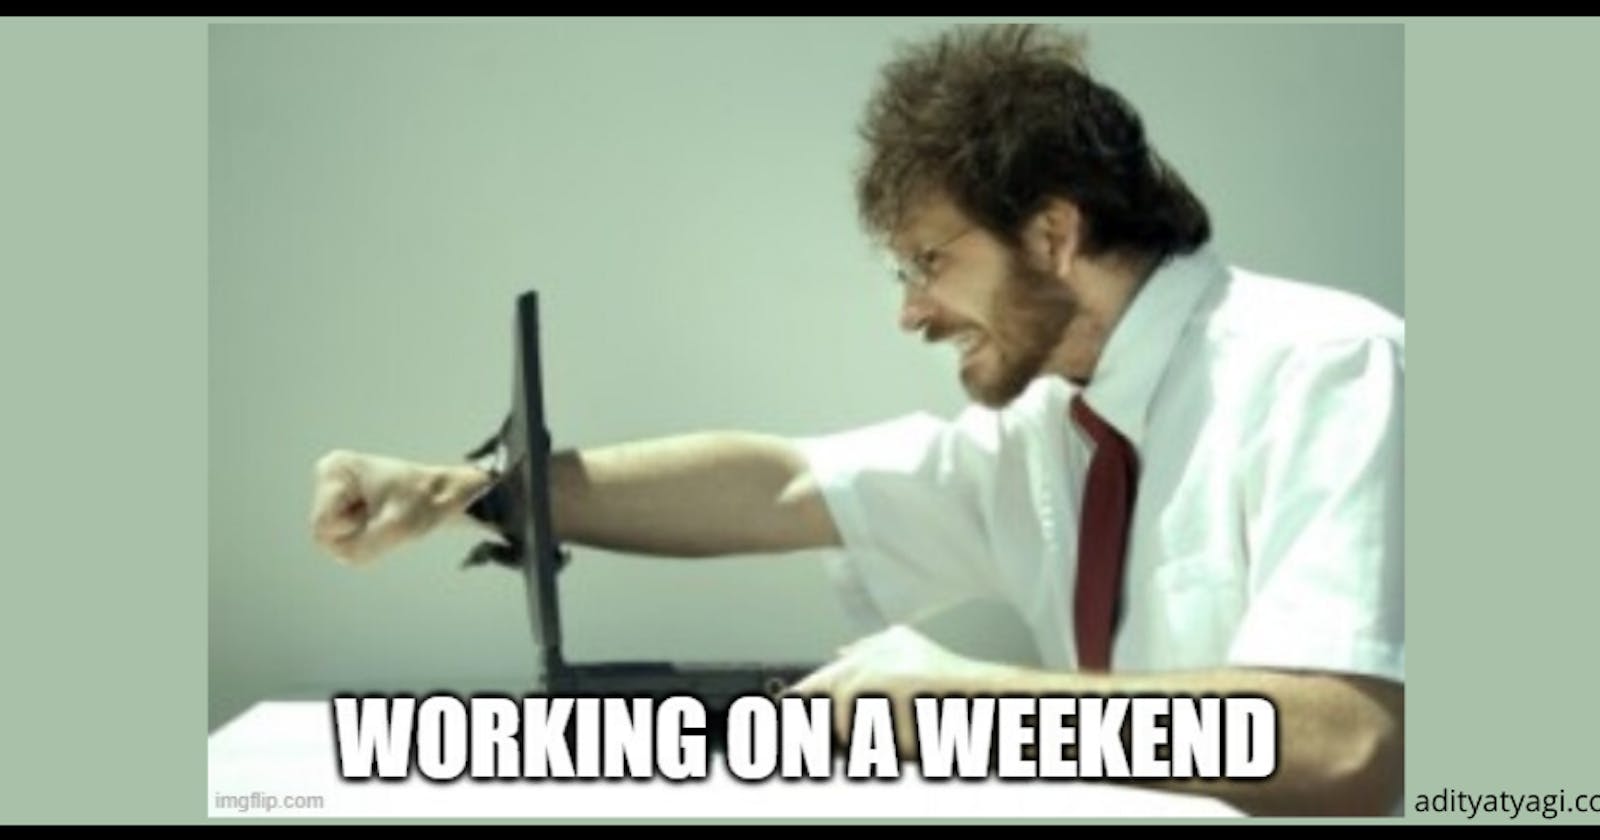 Why do you hate working on weekends?